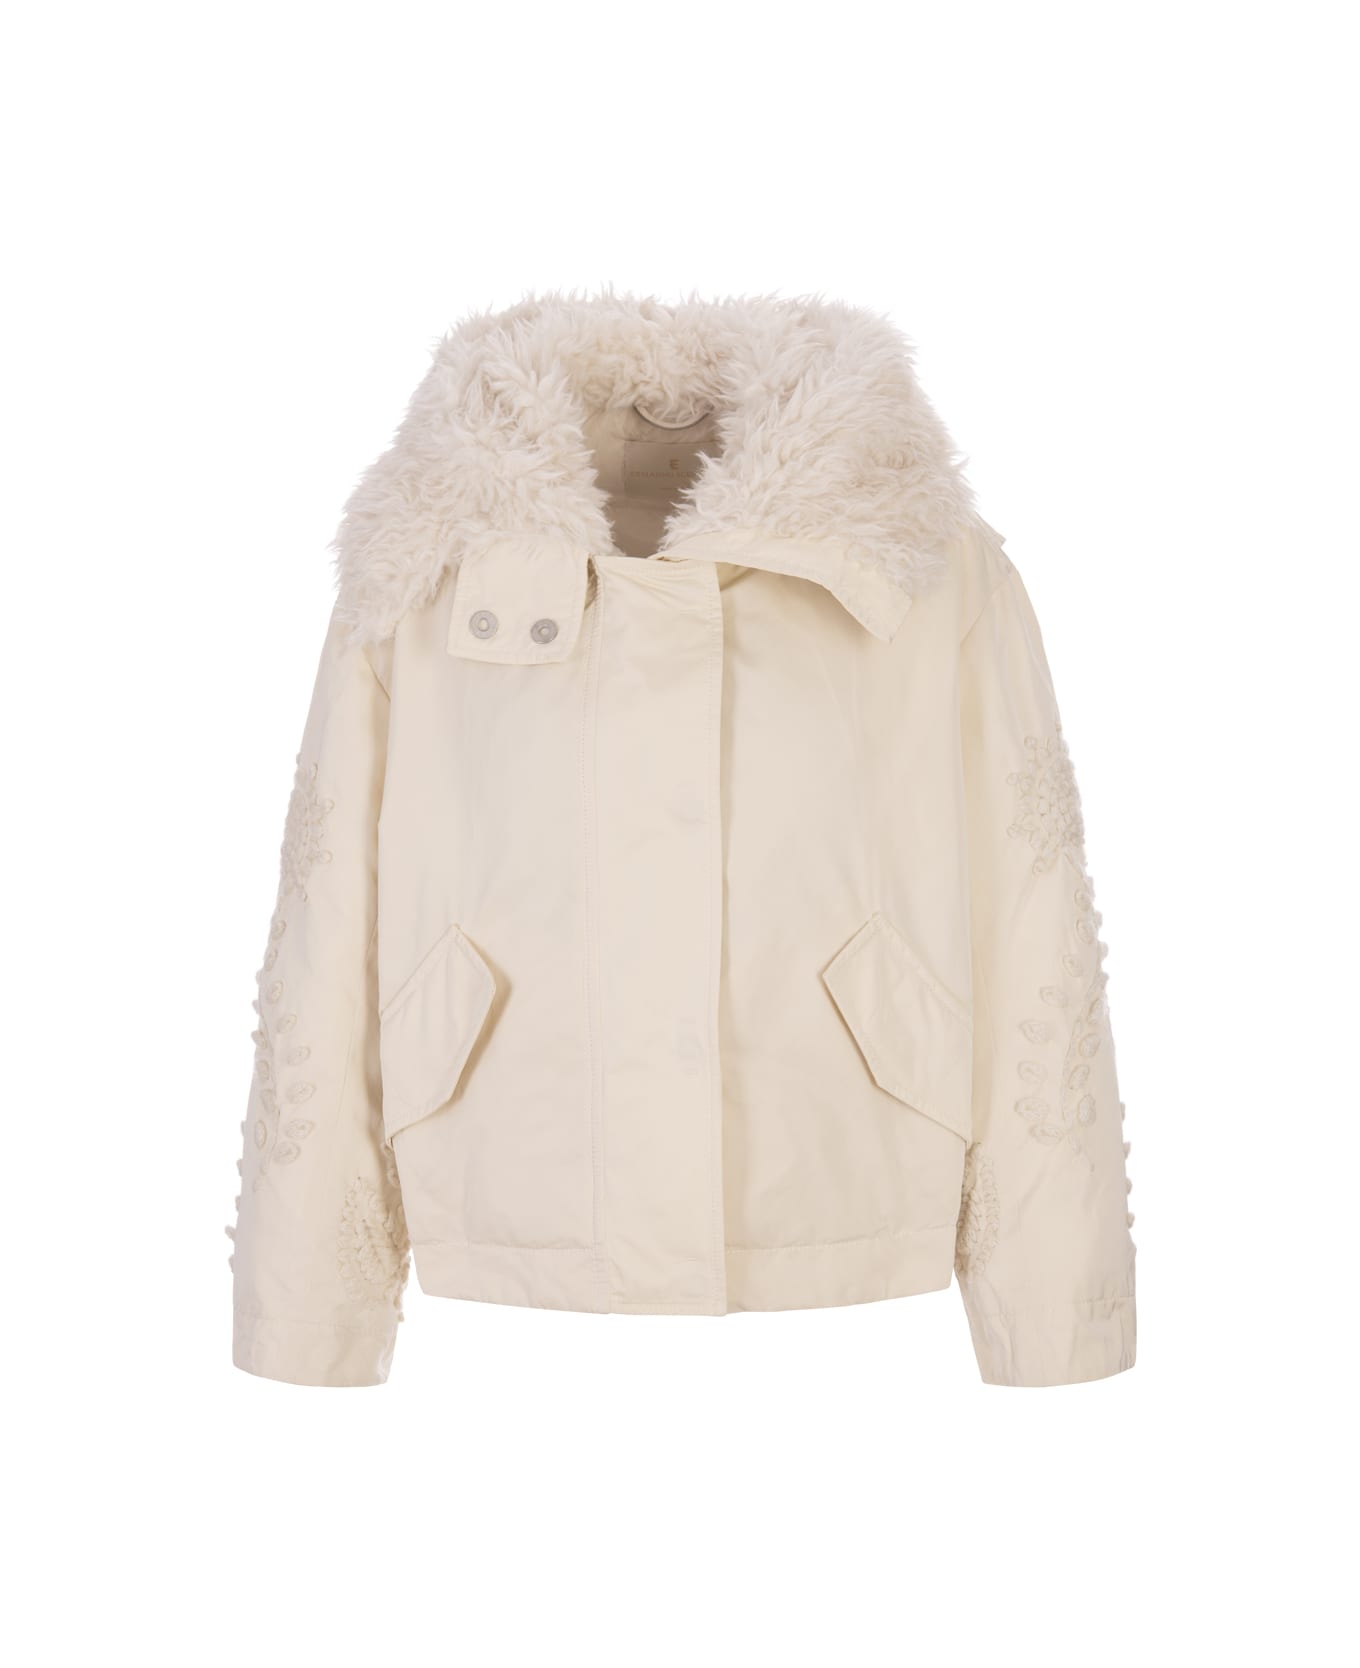 Ermanno Scervino White Jacket With Embroidery On Sleeves - White ジャケット